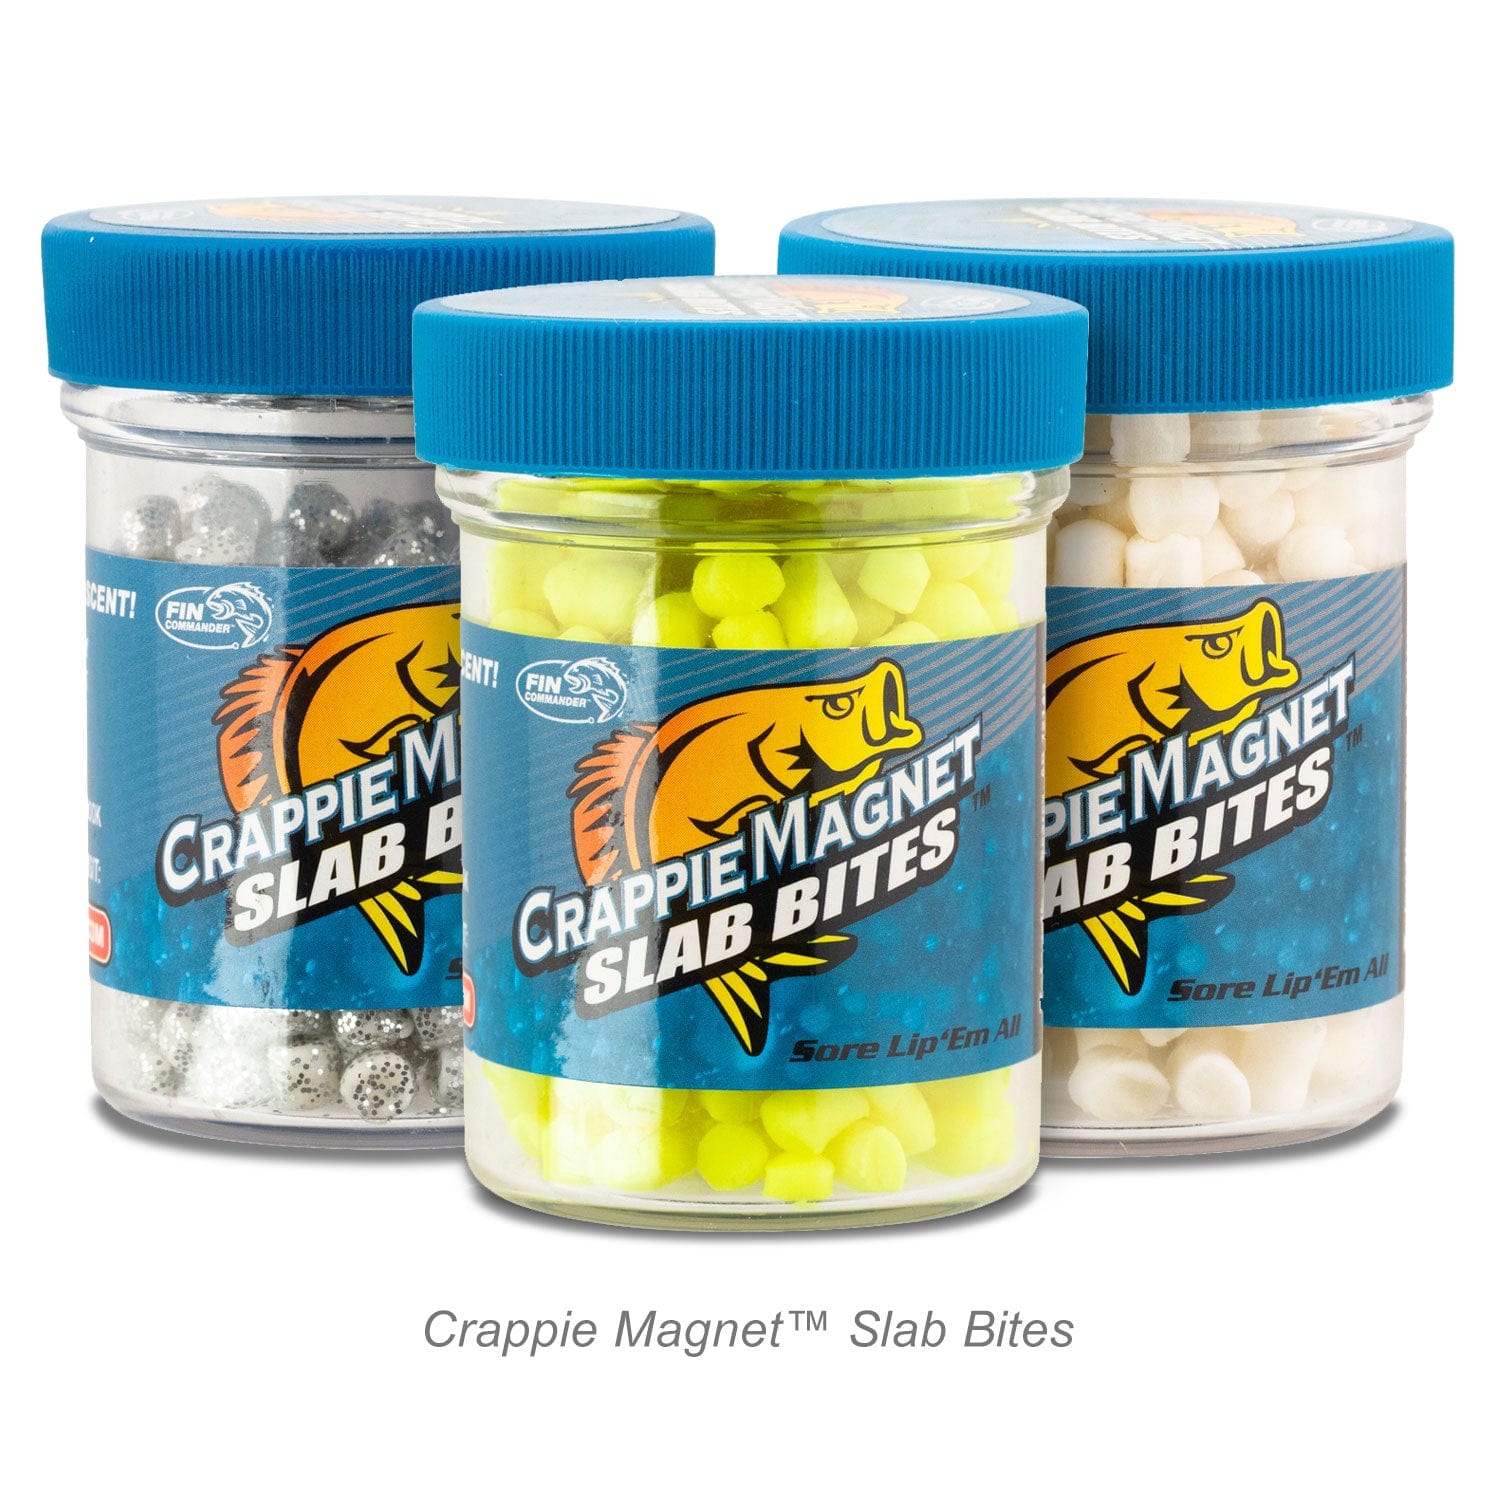 Blakemore Crappie X-Tractor 1/16 oz / Electric Chicken